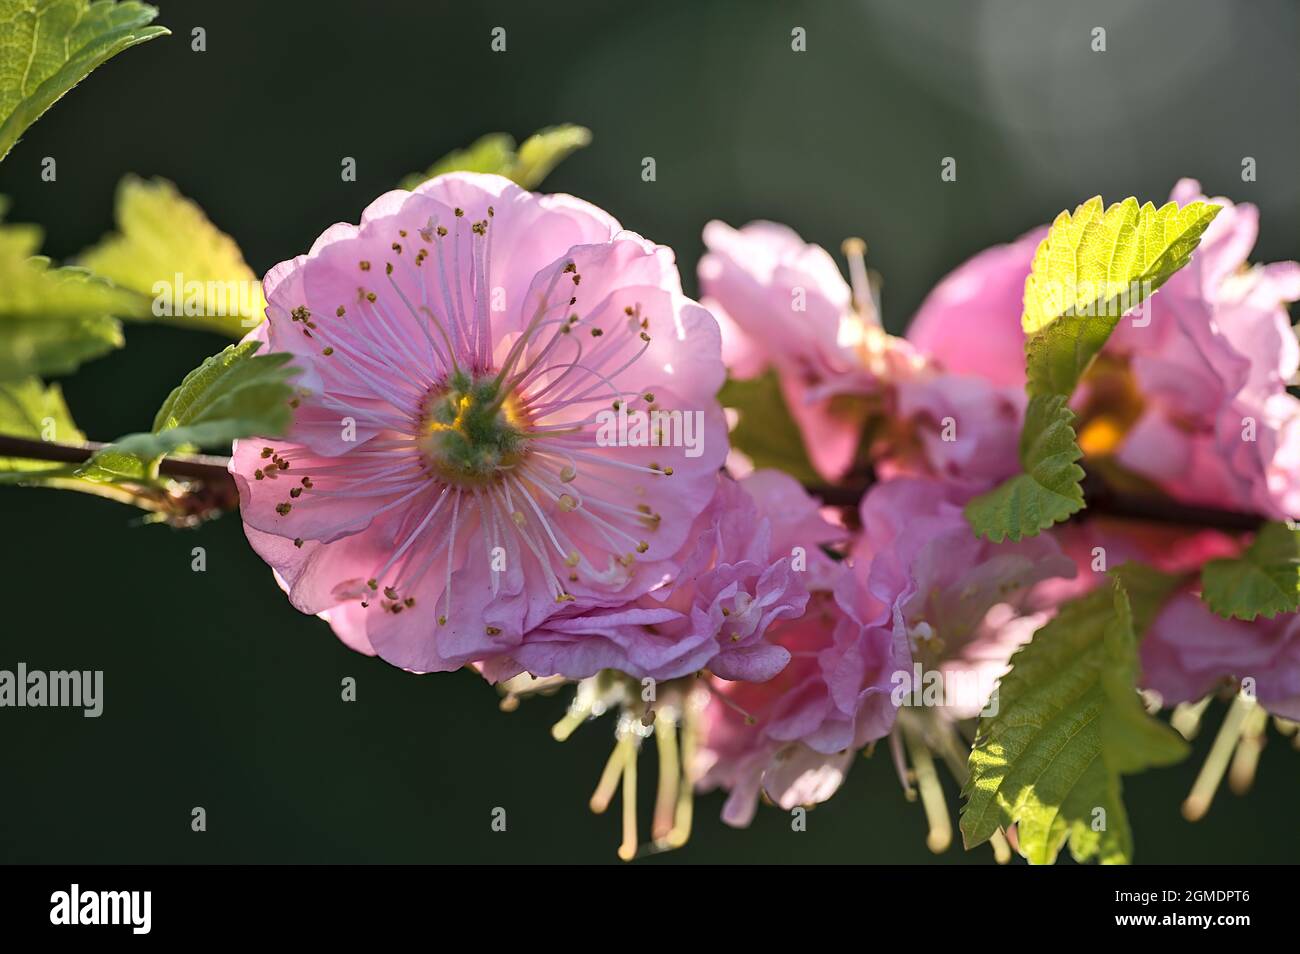 Macro view of delicate spring pink flowering almond tree (Prunus triloba 'Multiplex') blossoms on tree branch against blurred green background Stock Photo